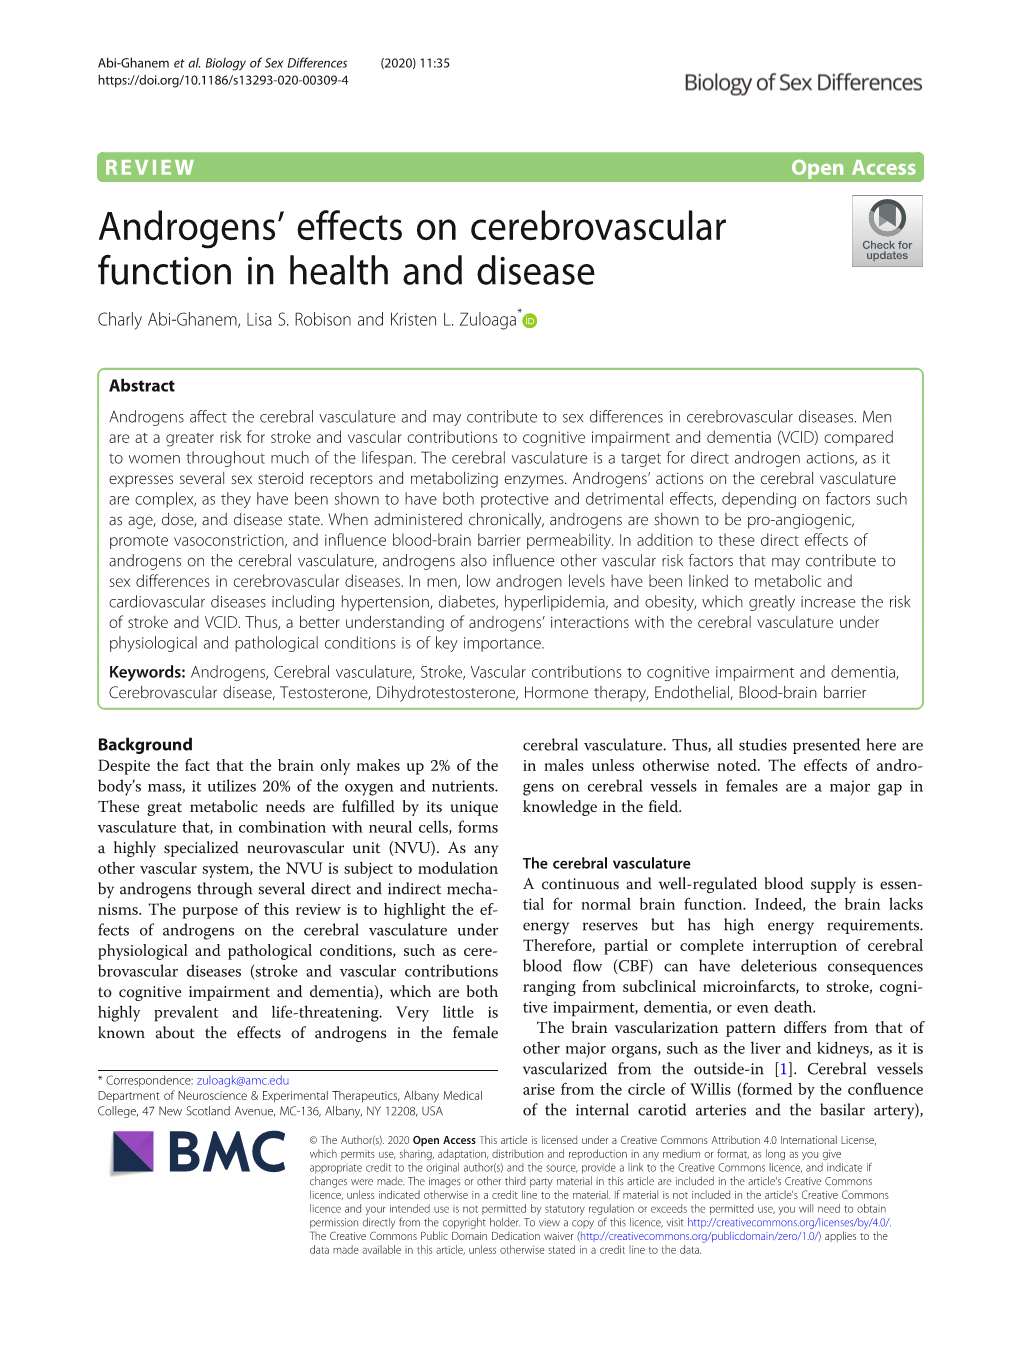 Androgens' Effects on Cerebrovascular Function in Health and Disease